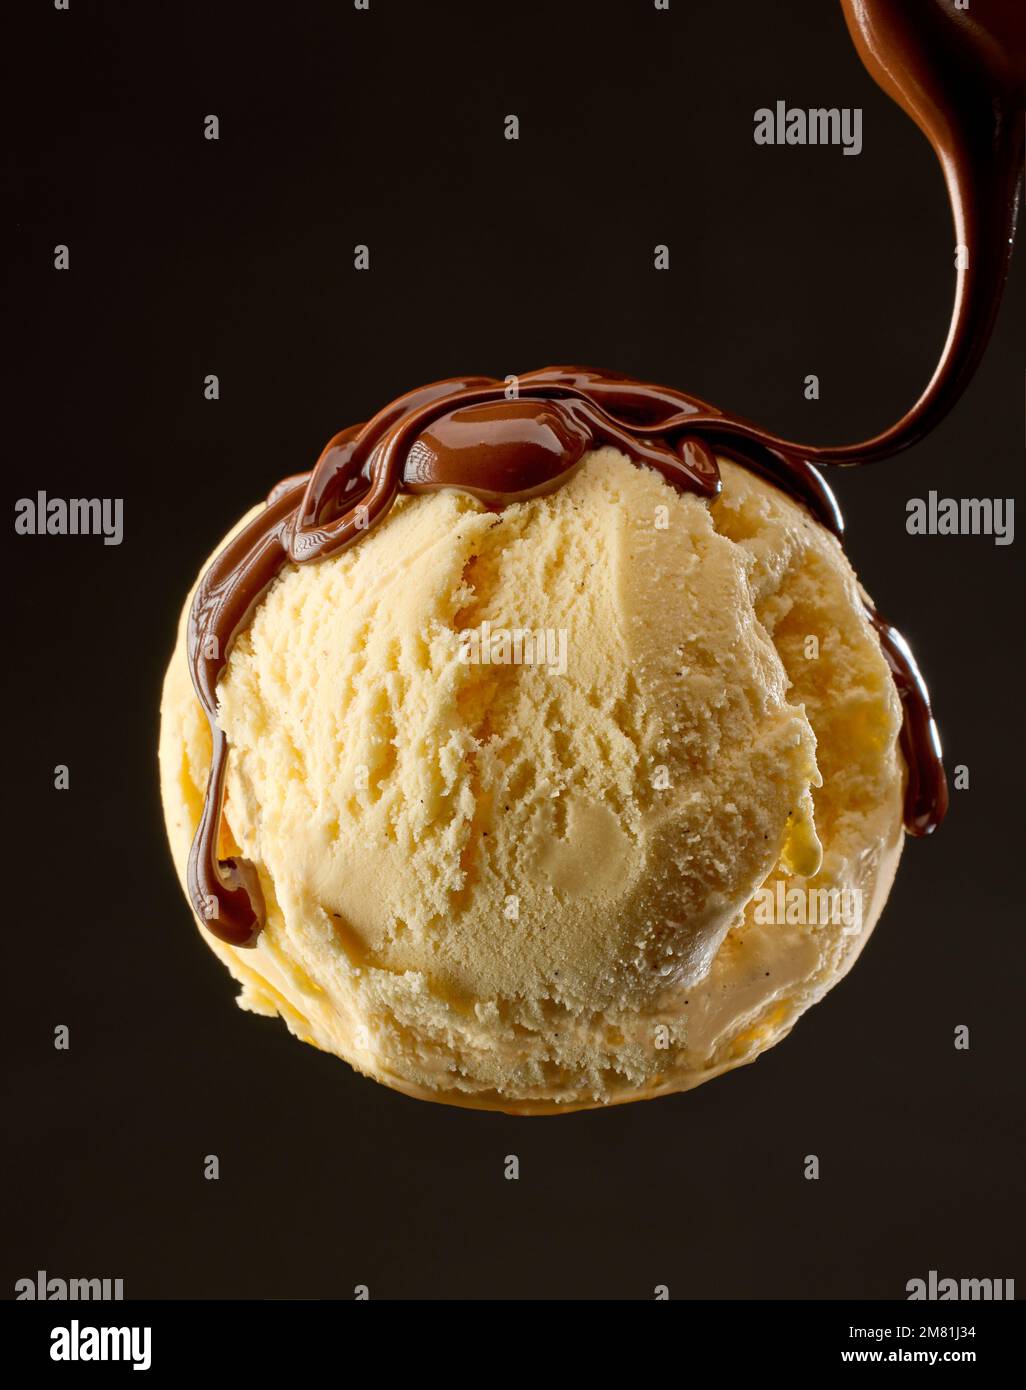 https://c8.alamy.com/comp/2M81J34/vanilla-ice-cream-ball-with-pouring-melted-chocolate-sauce-on-black-background-2M81J34.jpg